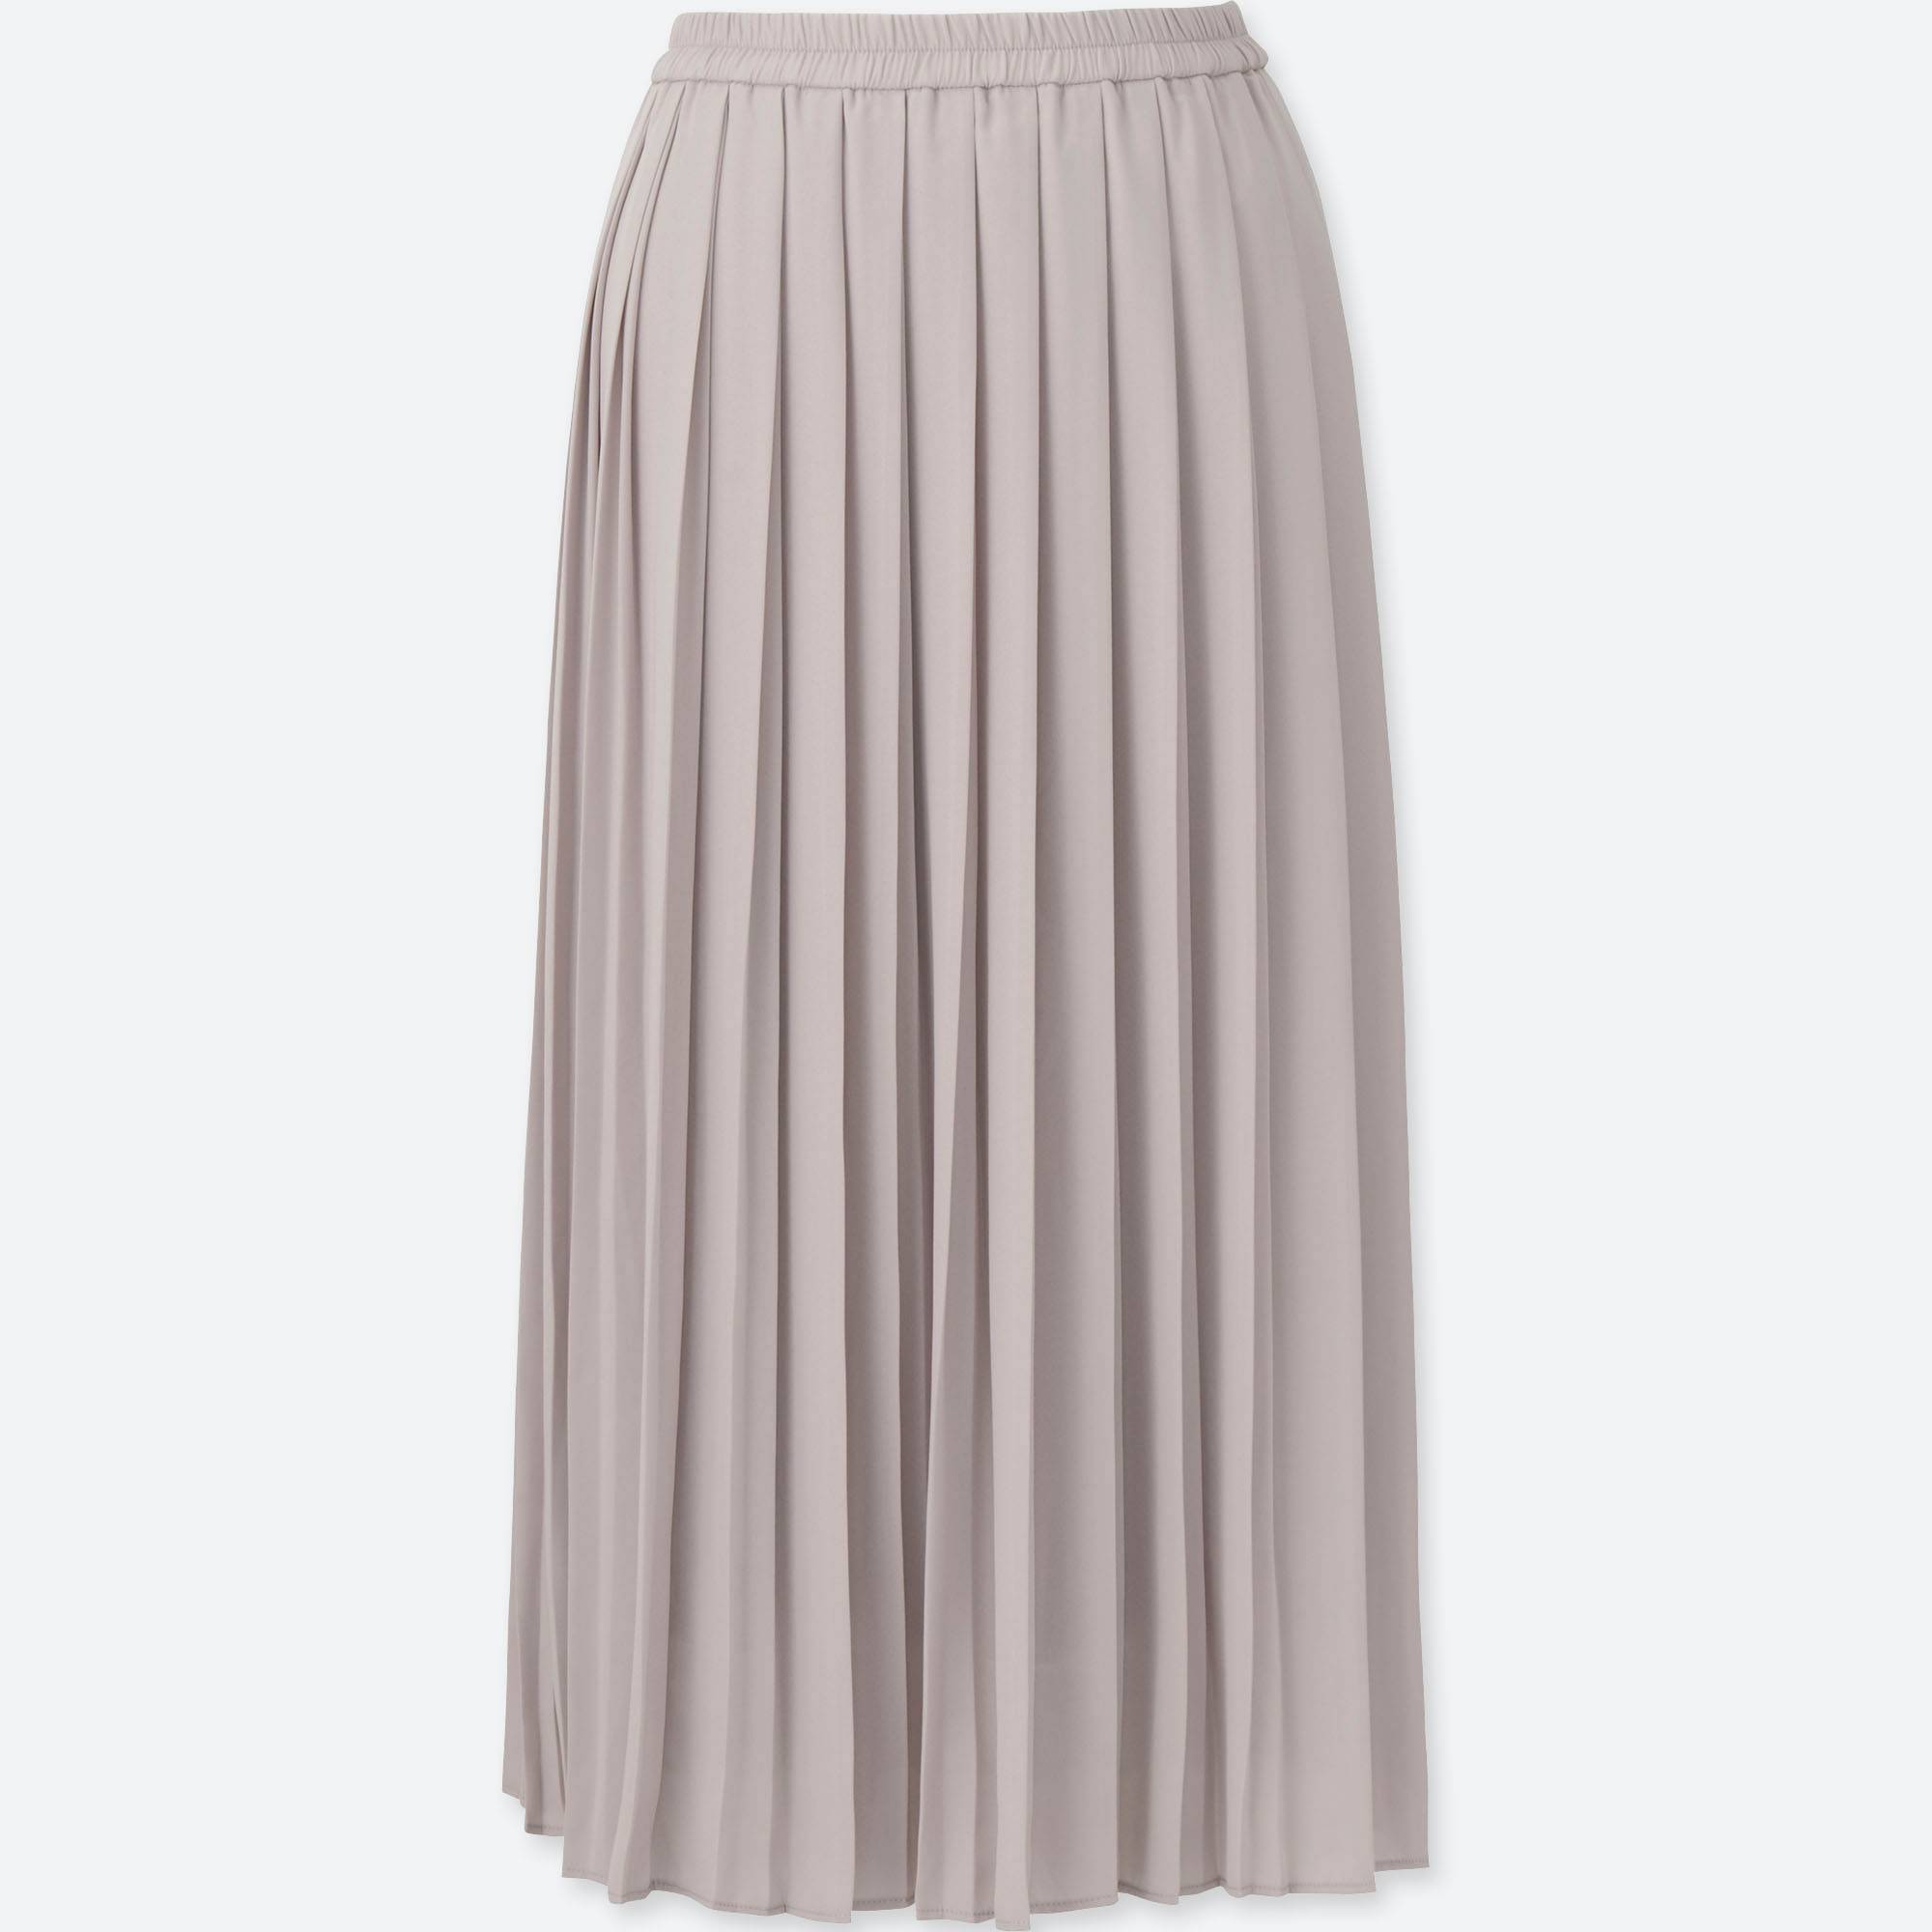 pleated skirt this review is fromwomen high waist chiffon pleated midi skirt. utcvcqu